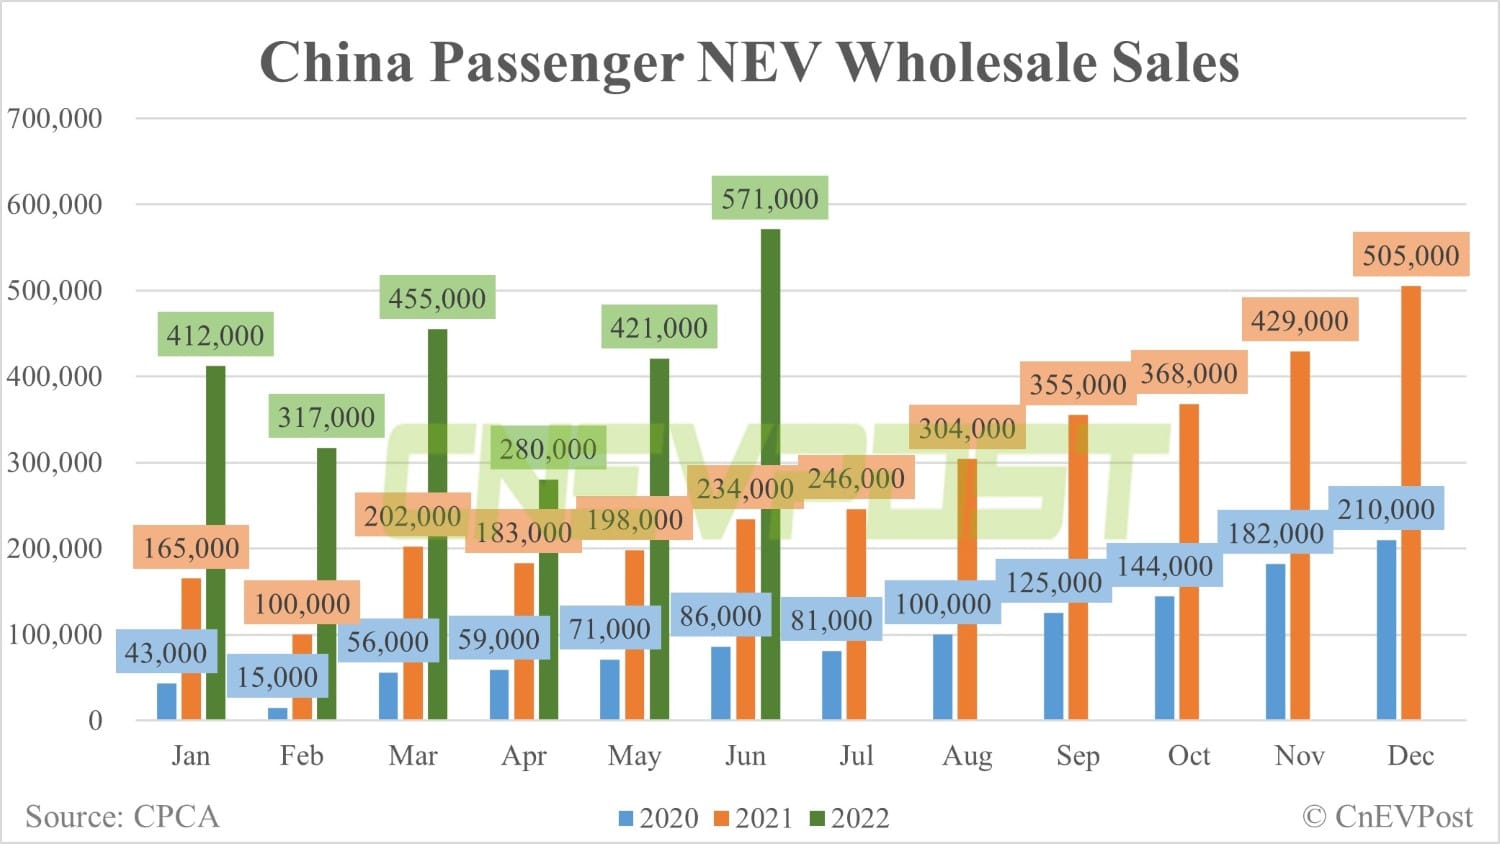 China's wholesale sales of passenger NEVs hit record 571,000 units in June, CPCA data show-CnEVPost